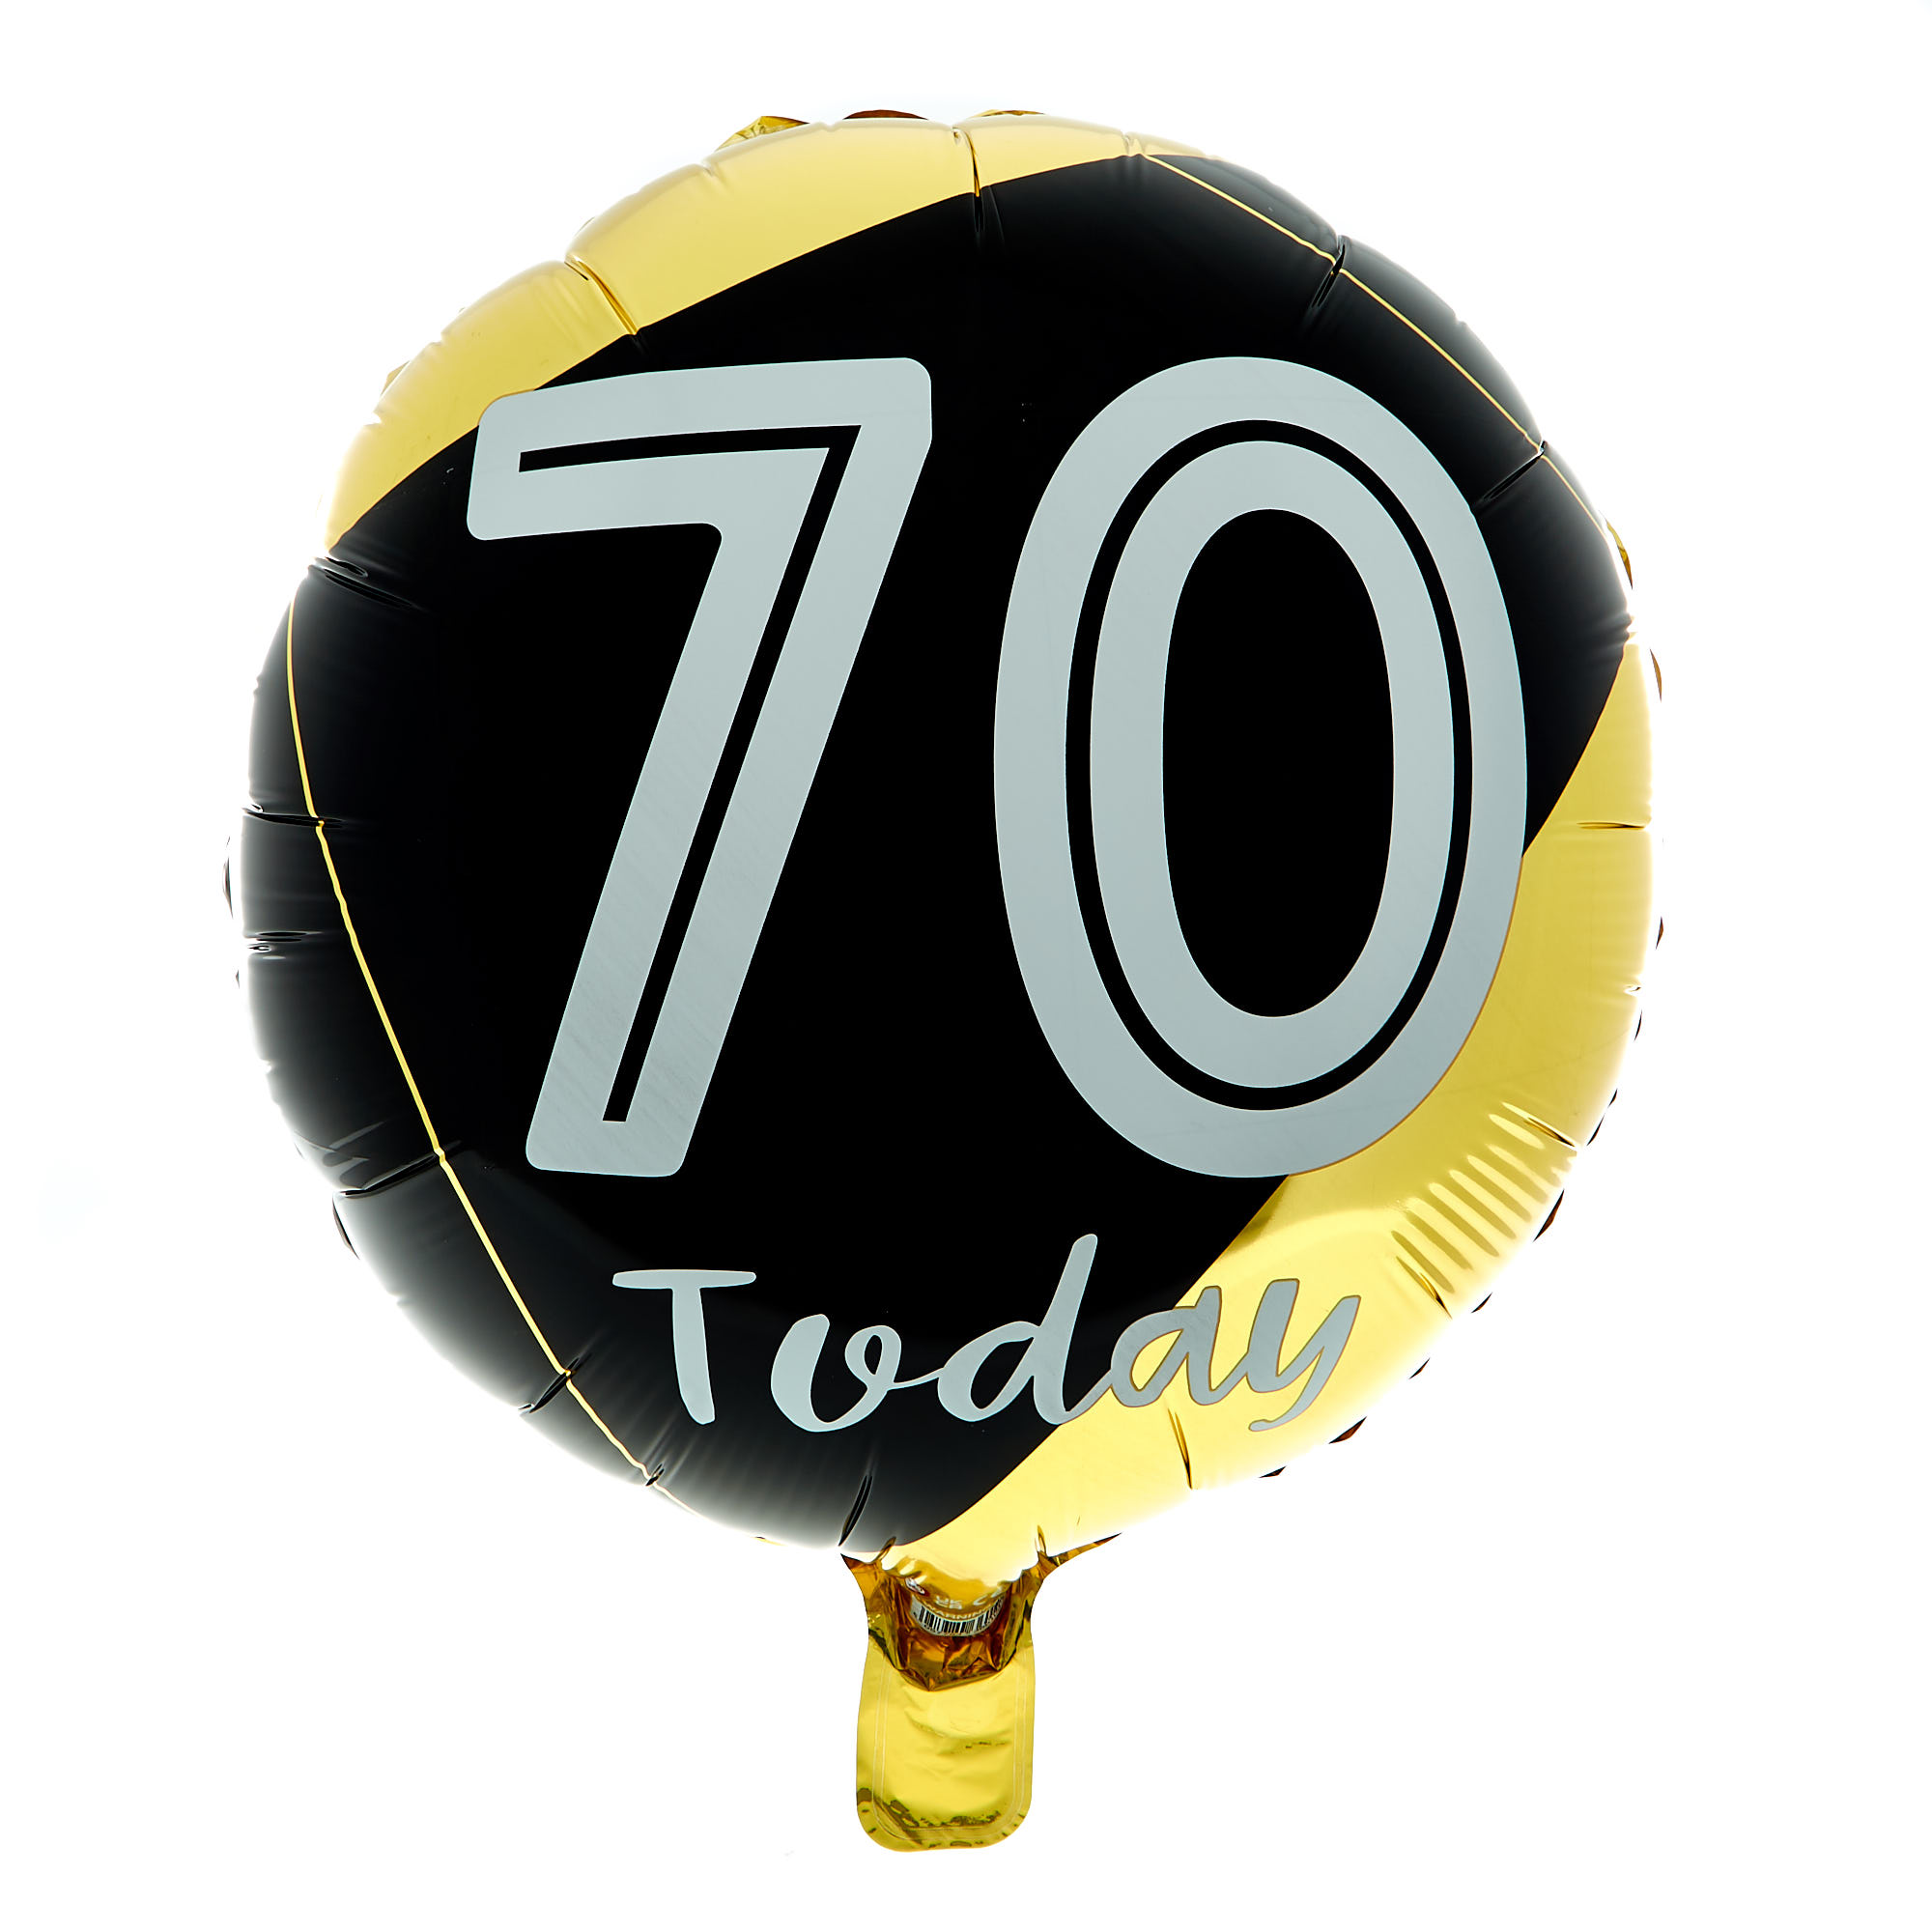 70 Today Birthday Balloon Bouquet - DELIVERED INFLATED!